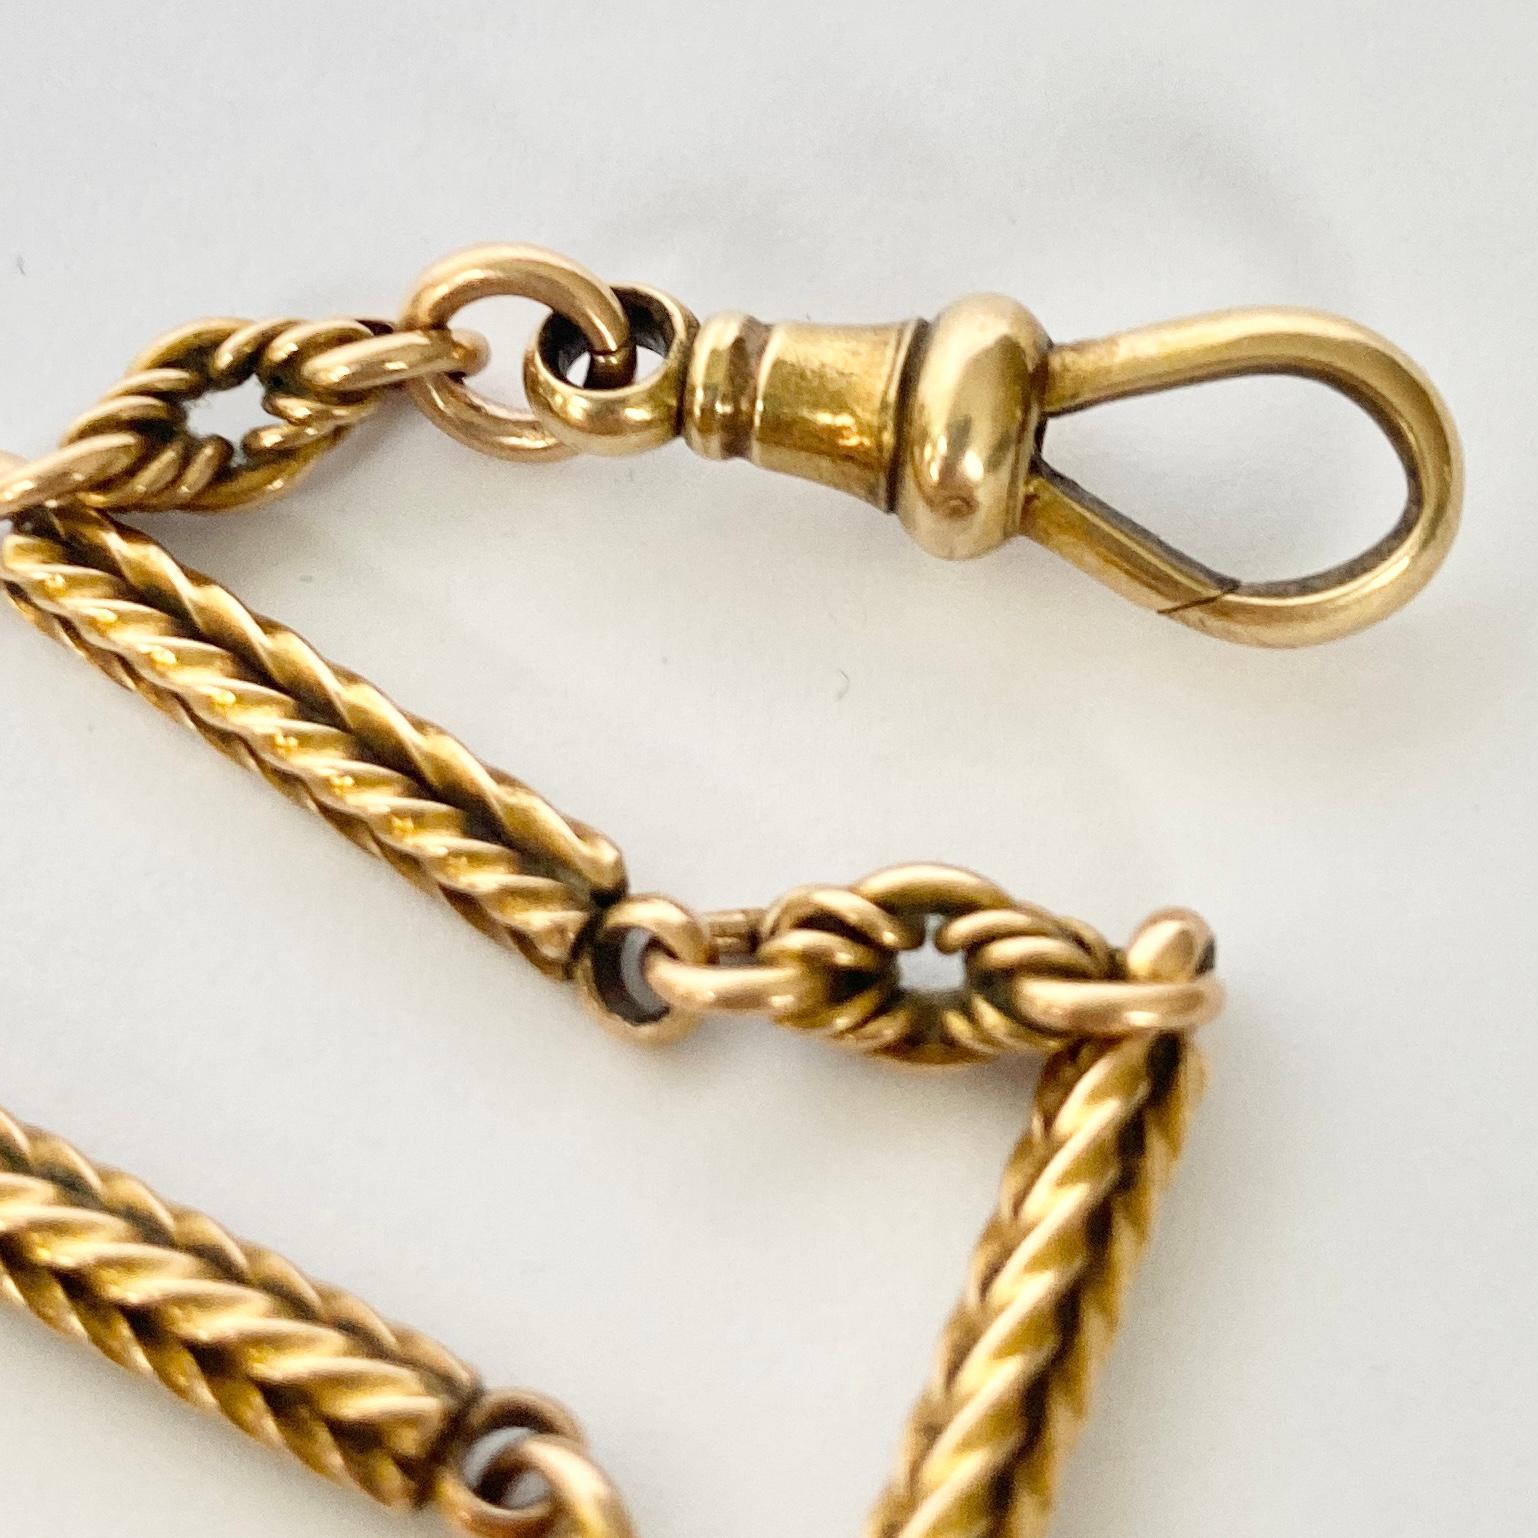 This gorgeous Albert has highly decorative links in it. One of the styles is a twisted square shaped link and the other is layered, knotted and twisted. There is a t-bar and tassel at one end and dog end at the other. 

Length: 28cm 
Width: 4mm